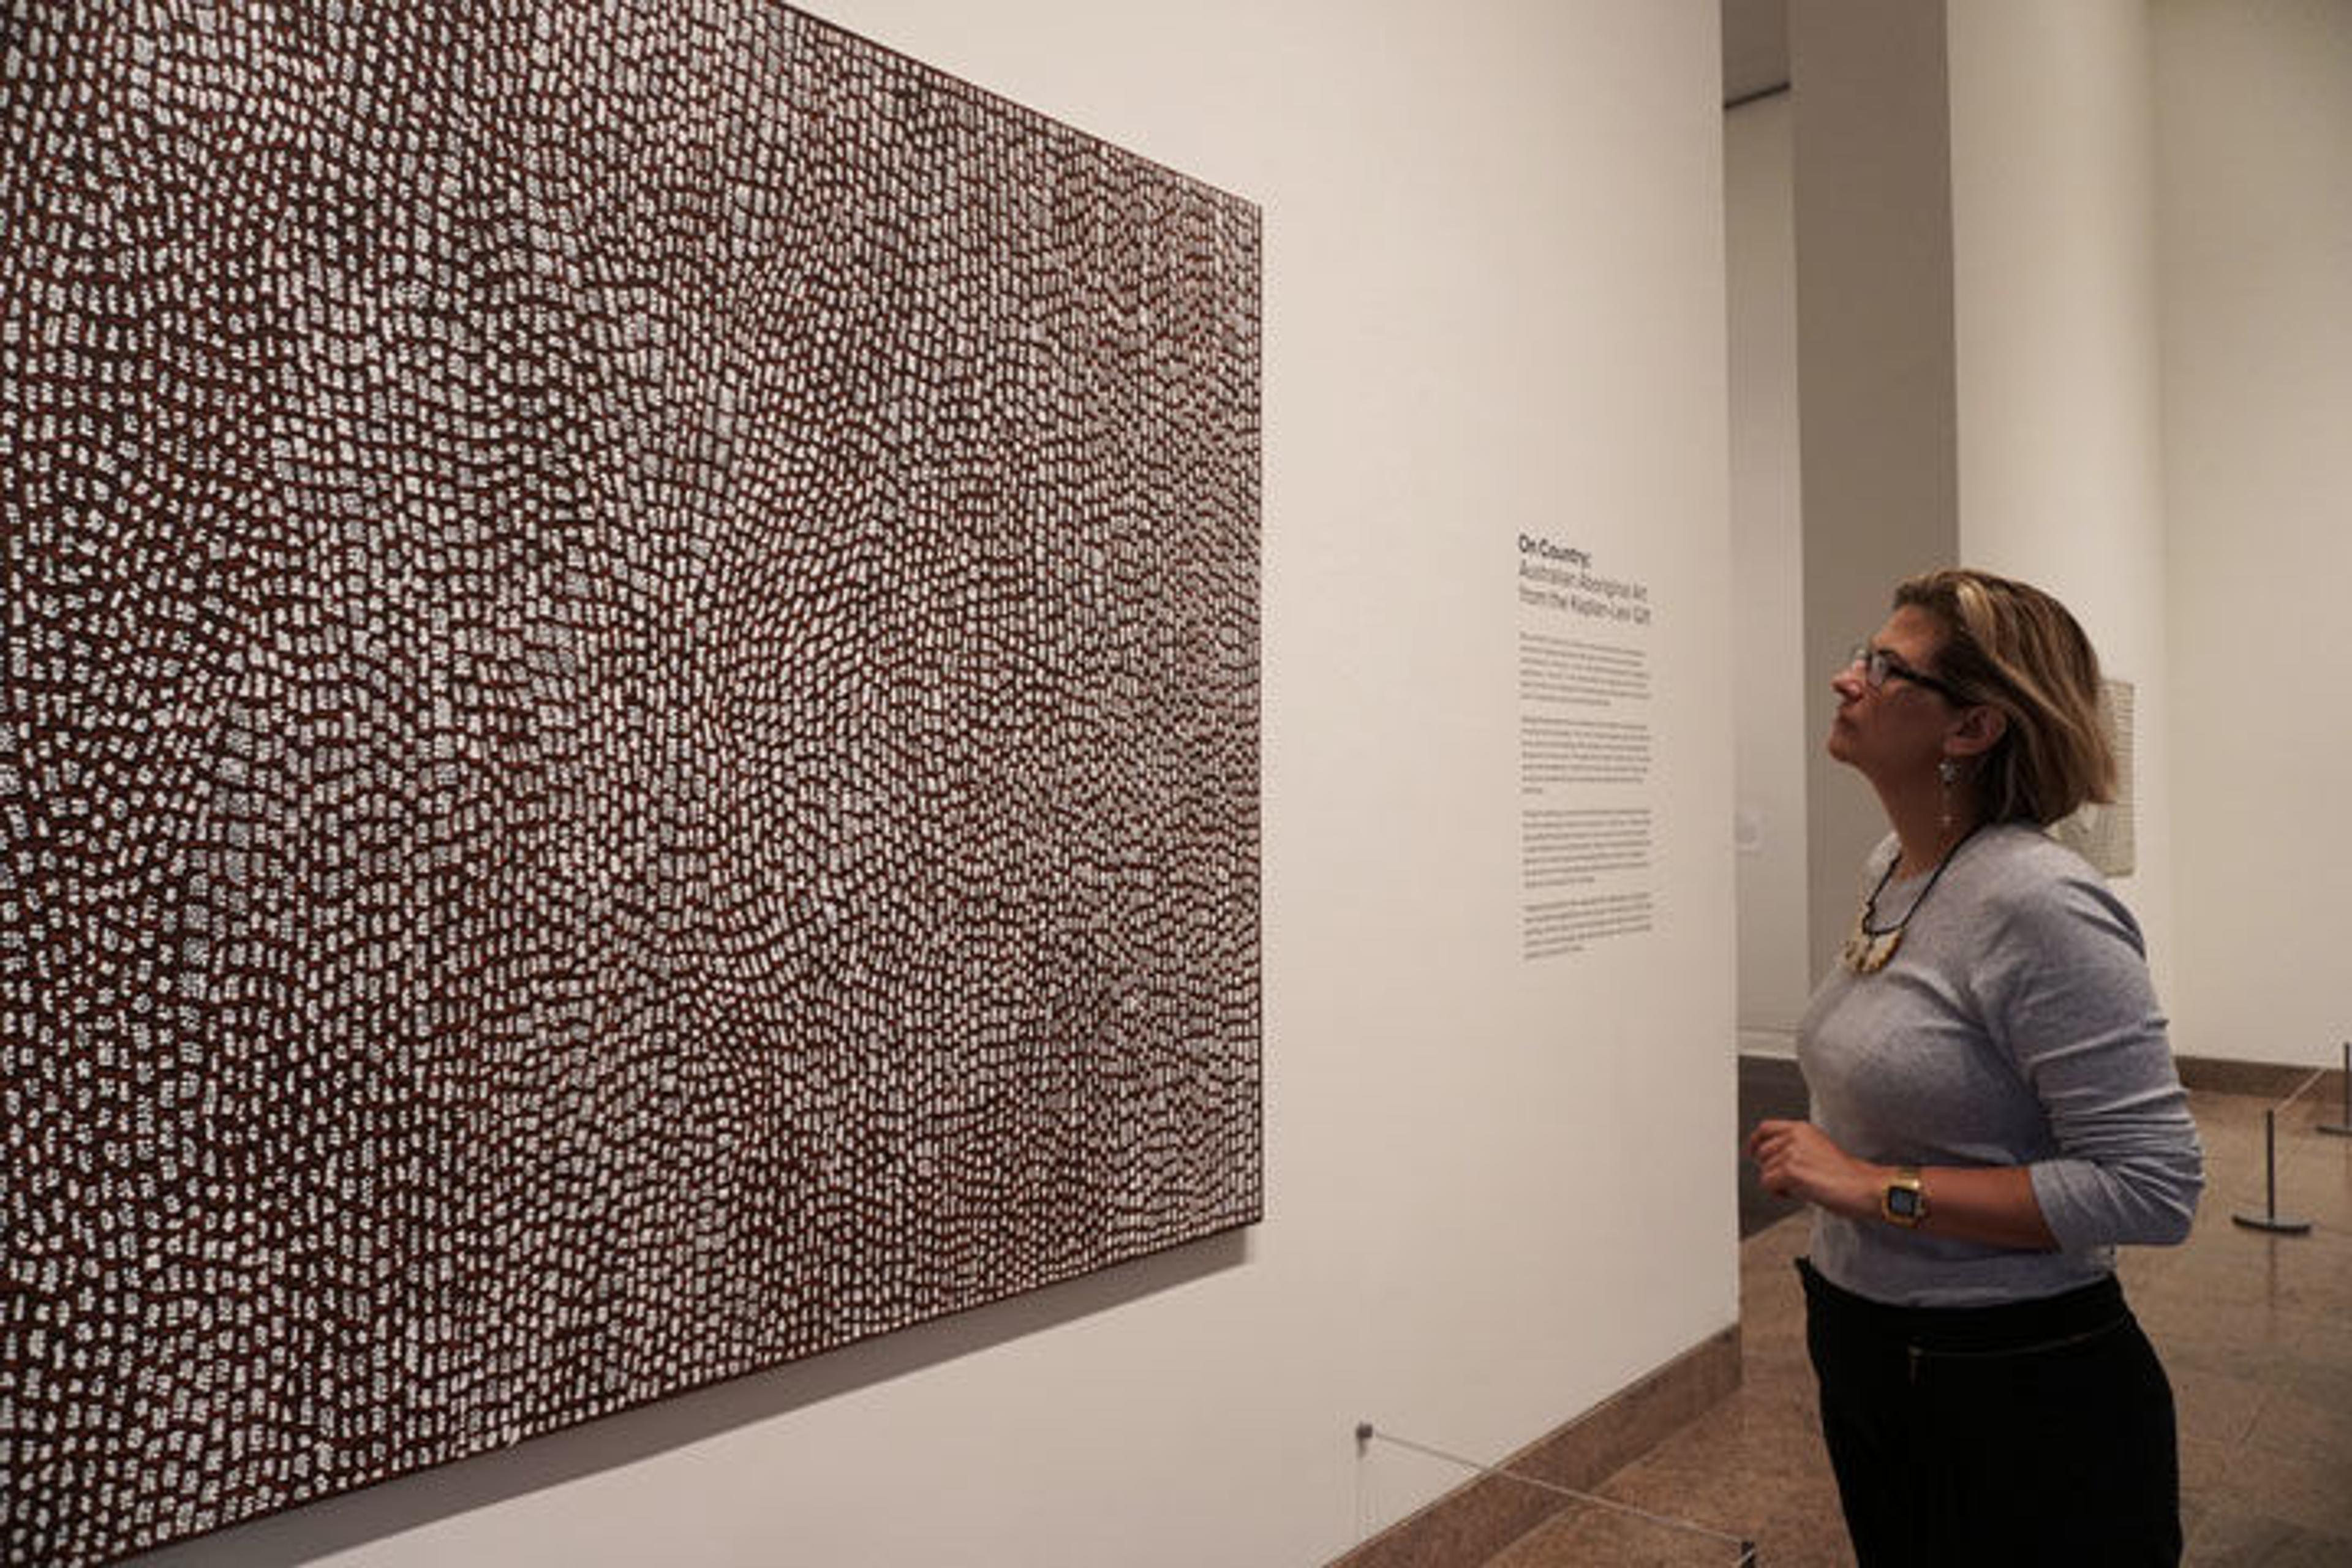 Associate Curator Maia Nuku observes a painting on view in an exhibition gallery